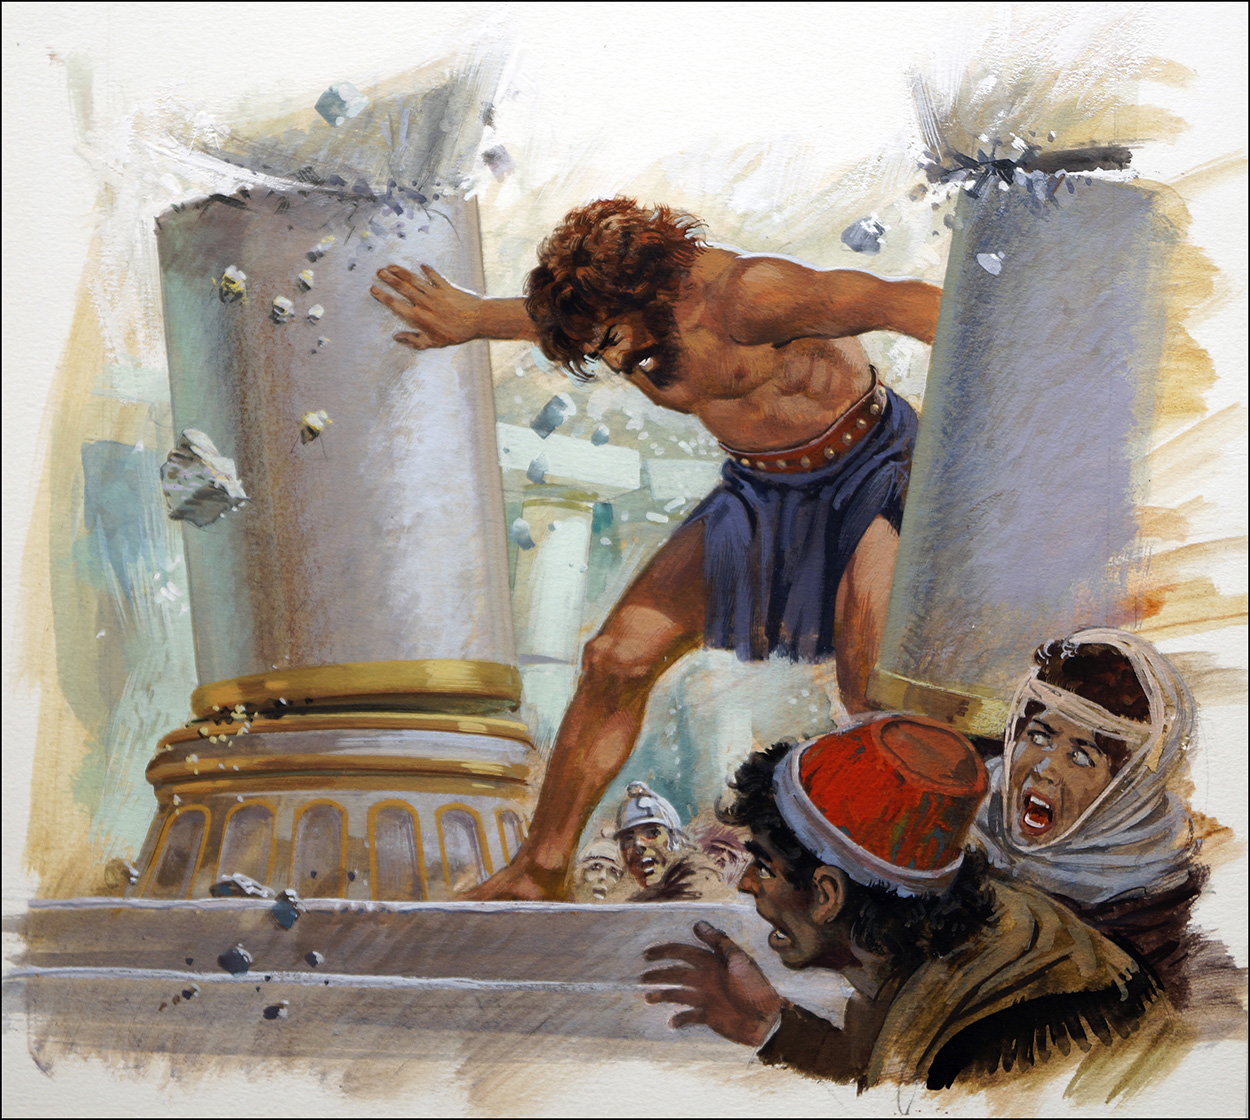 Samson Destroys the Philistines (Original) art by Andrew Howat Art at The Illustration Art Gallery